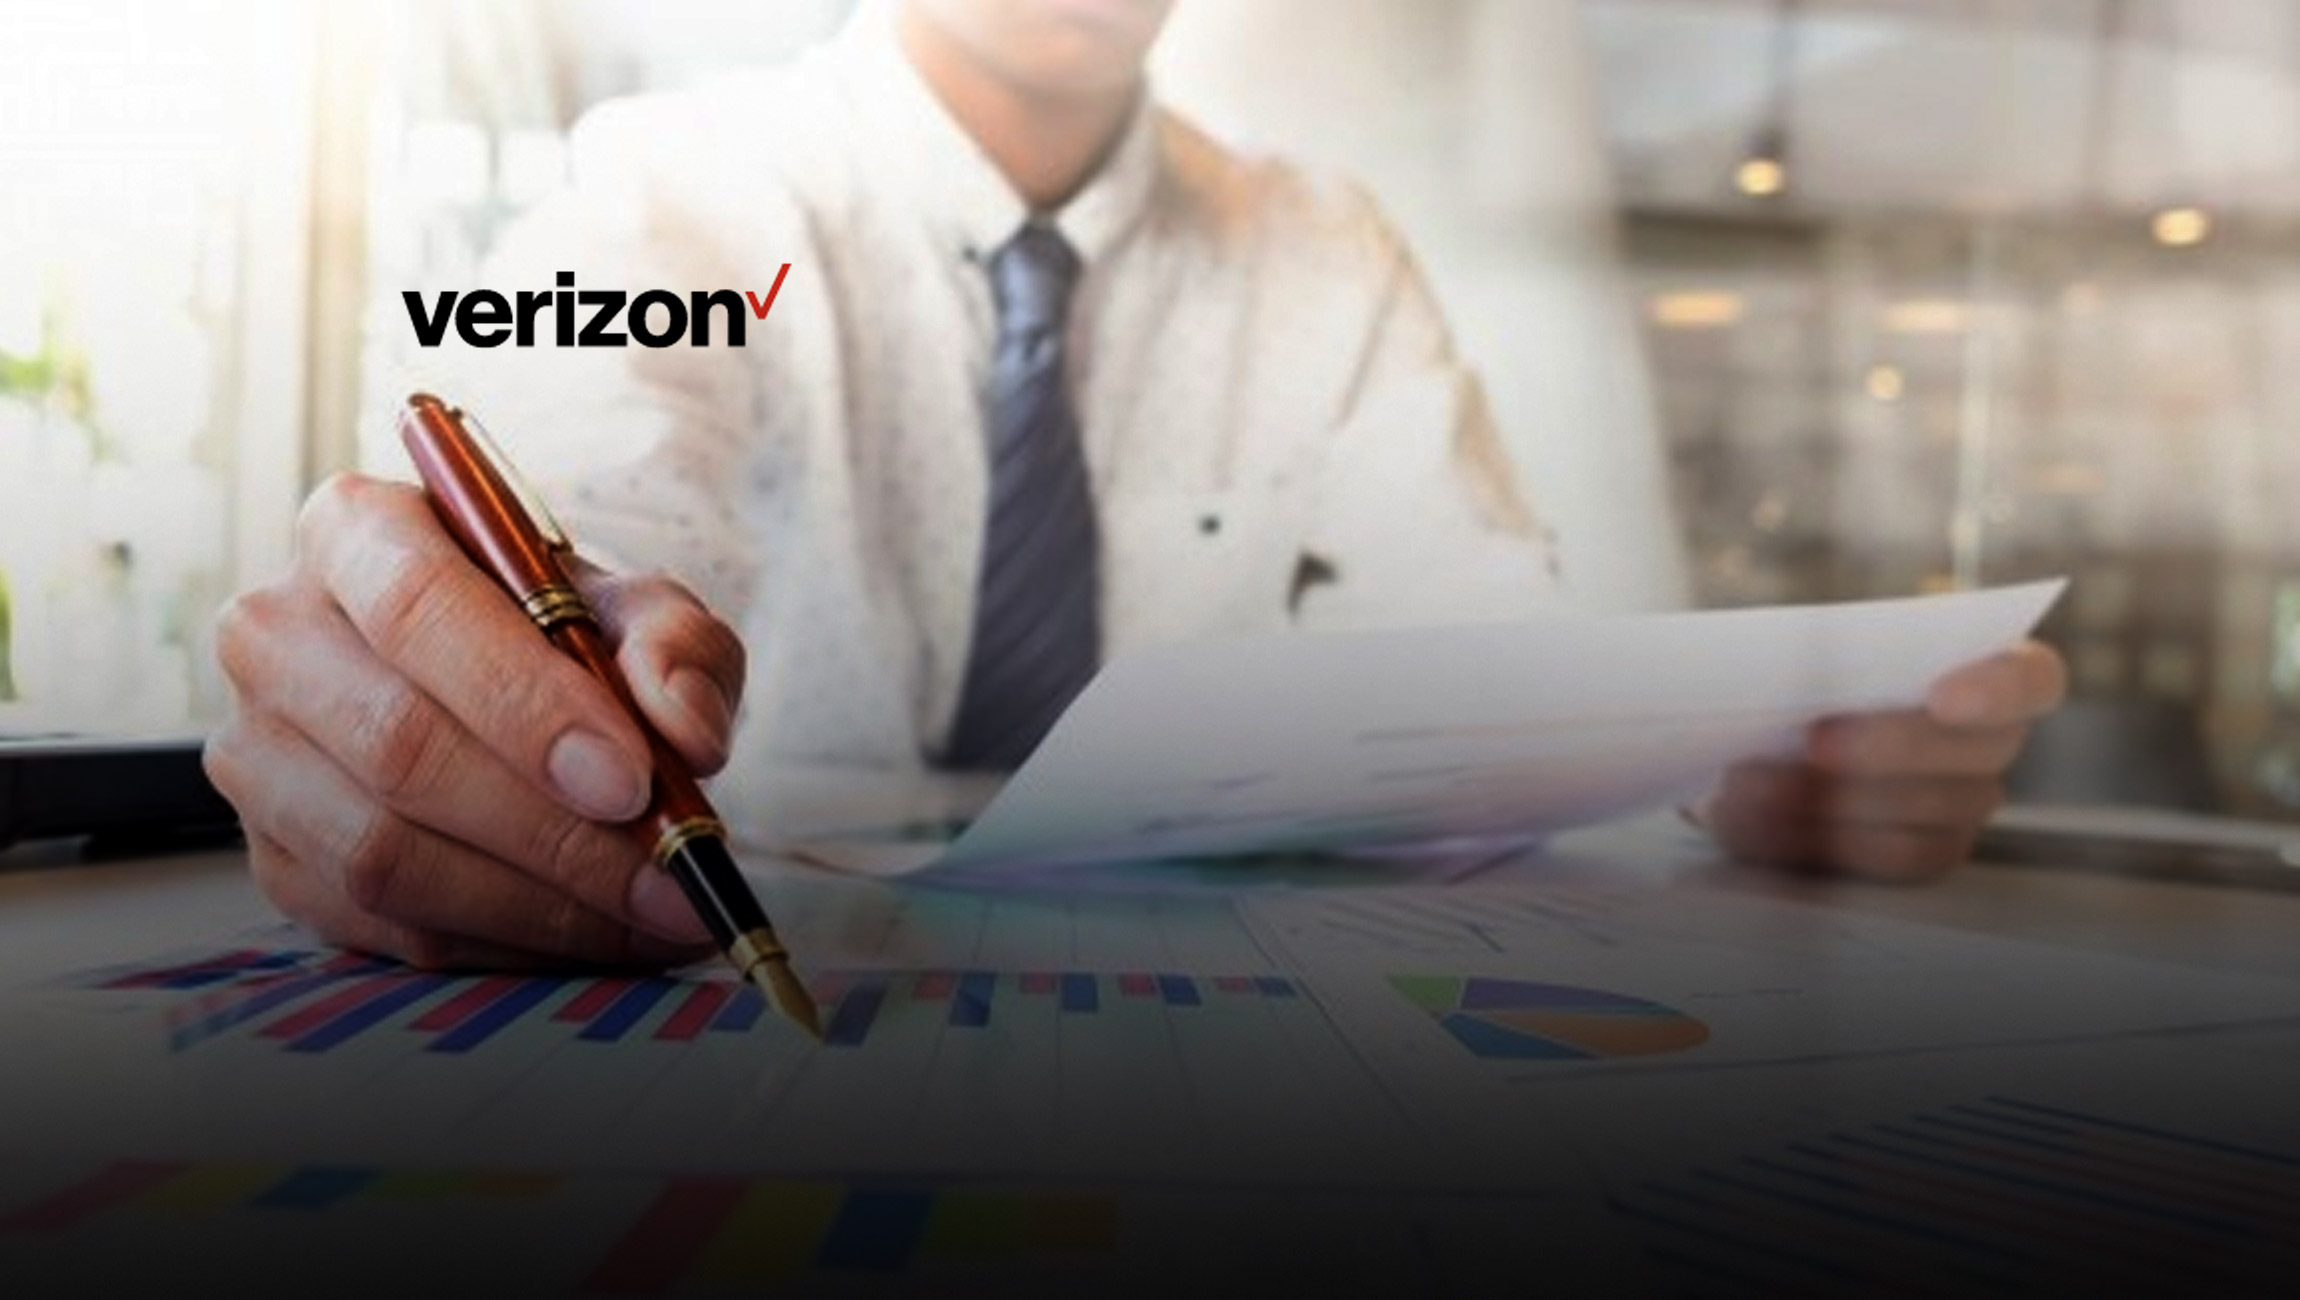 According to Verizon Business 2020 Payment Security Report: Only 1 in 4 Global Organizations Keep Cardholder Payment Data Secure